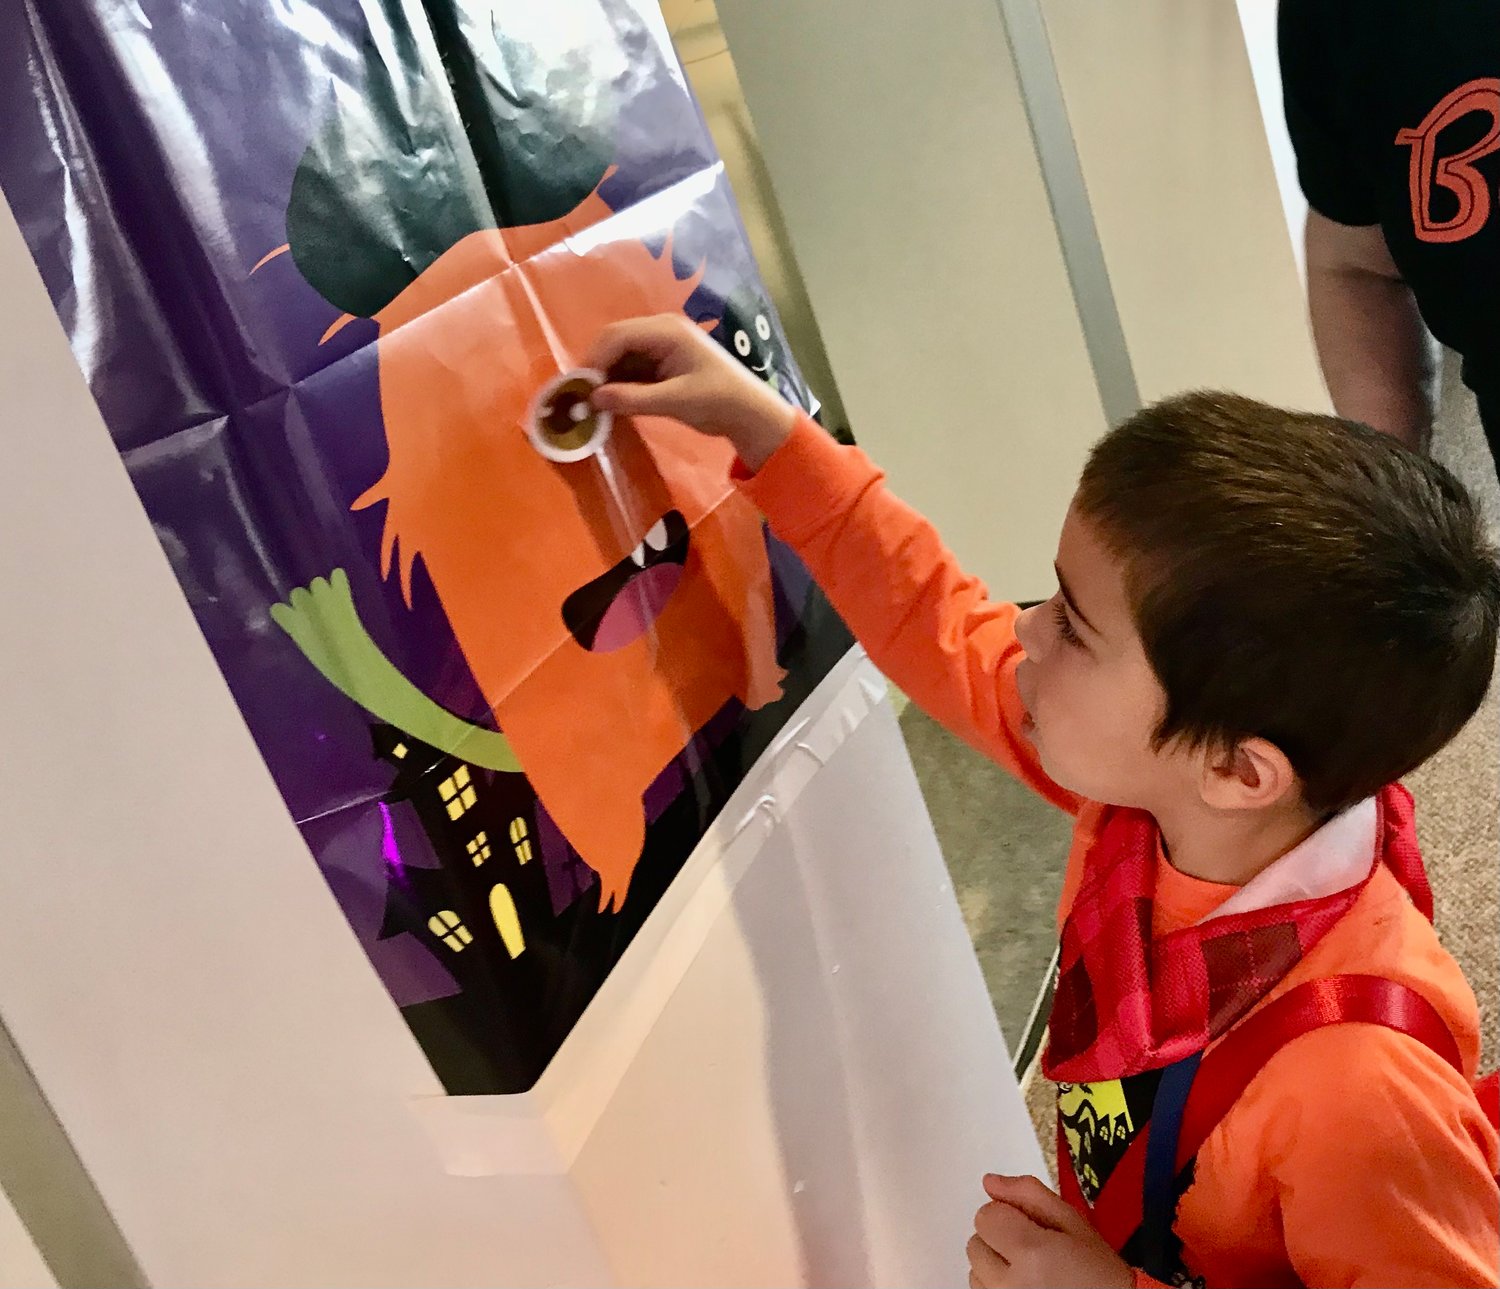 Dominick Rugari of Whitesboro plays pin the nose on the manster Oct. 29 during the Halloween Celebration at Mohawk Valley Community College in Utica.